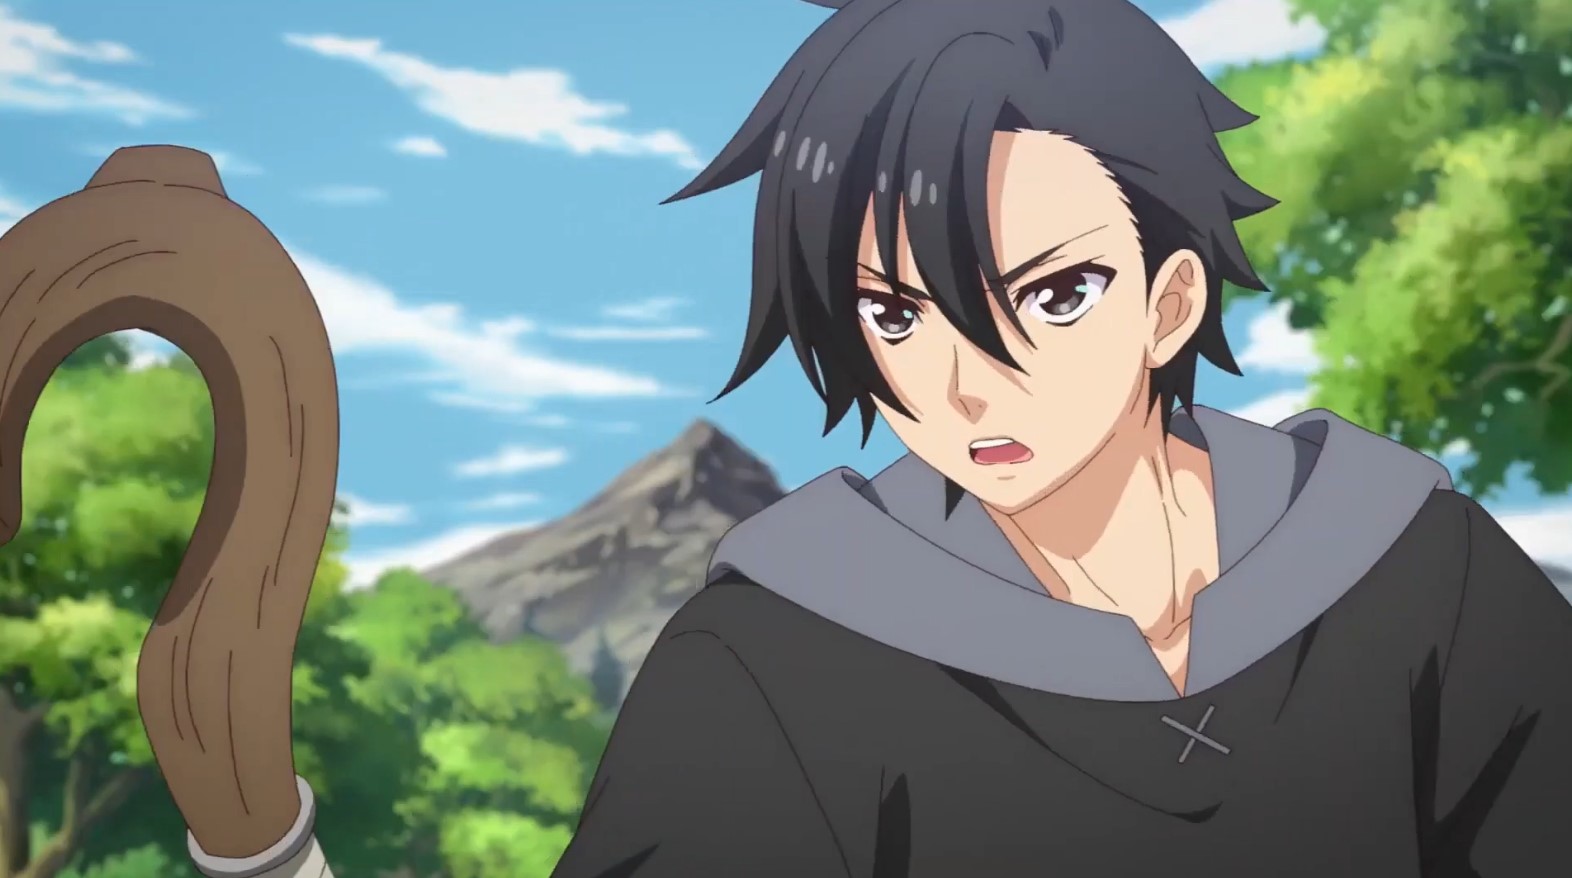 Black Summoner Episode 10: A New Hero On The Rise! Release Date & Plot